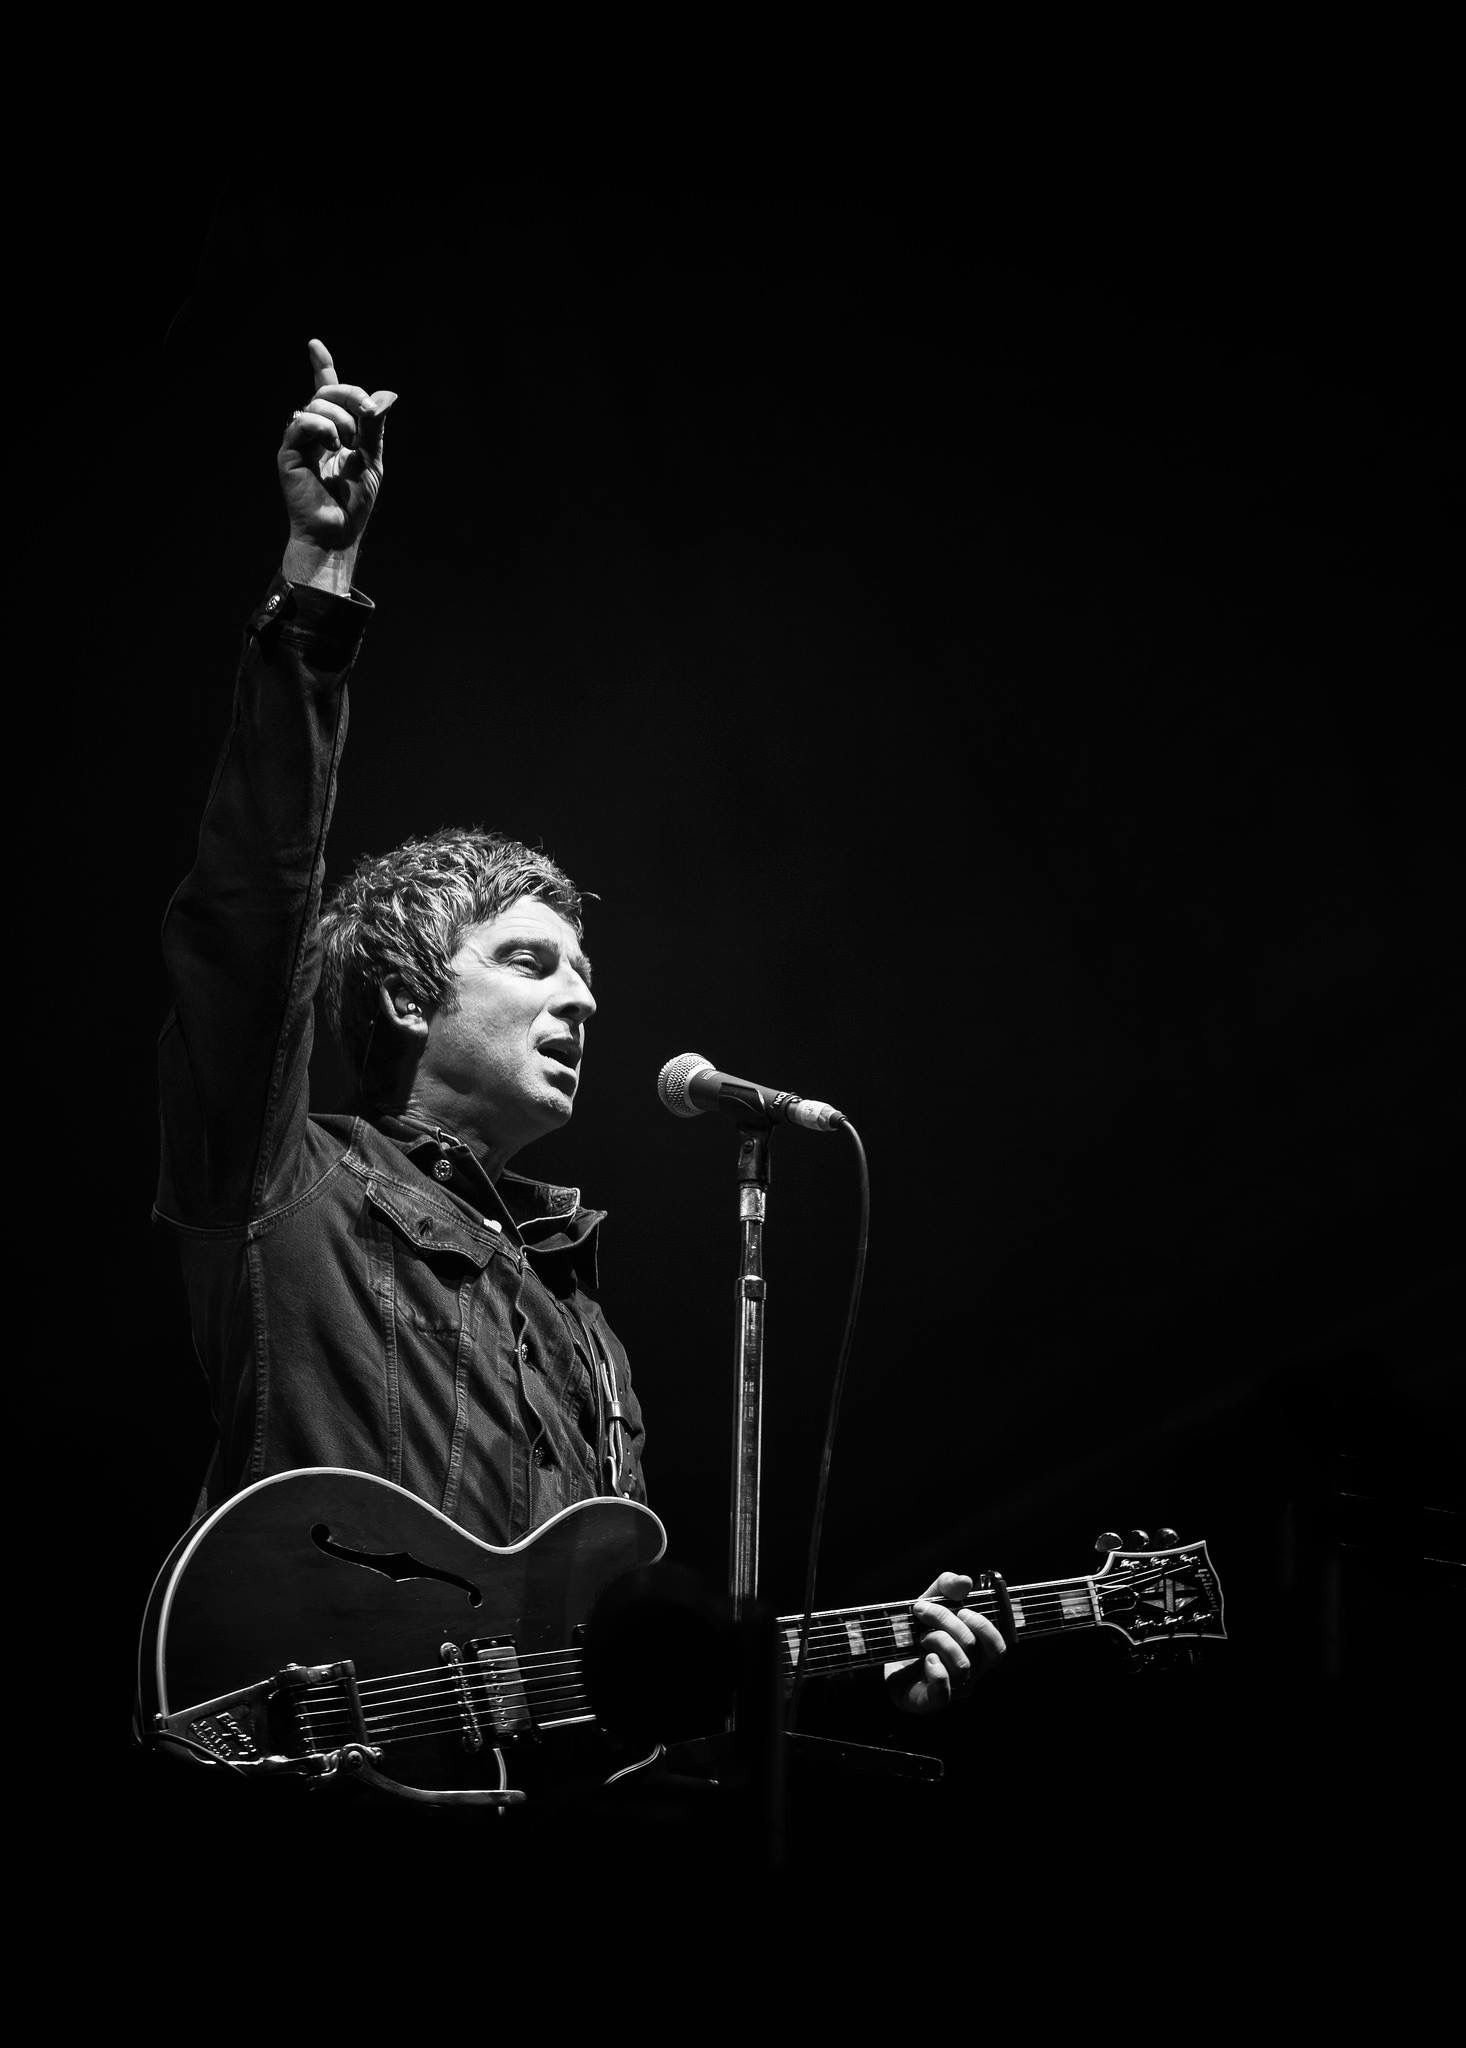 People 1466x2048 men Noel Gallagher Oasis (band) concerts monochrome microphone electric guitar Gibson simple background rock music